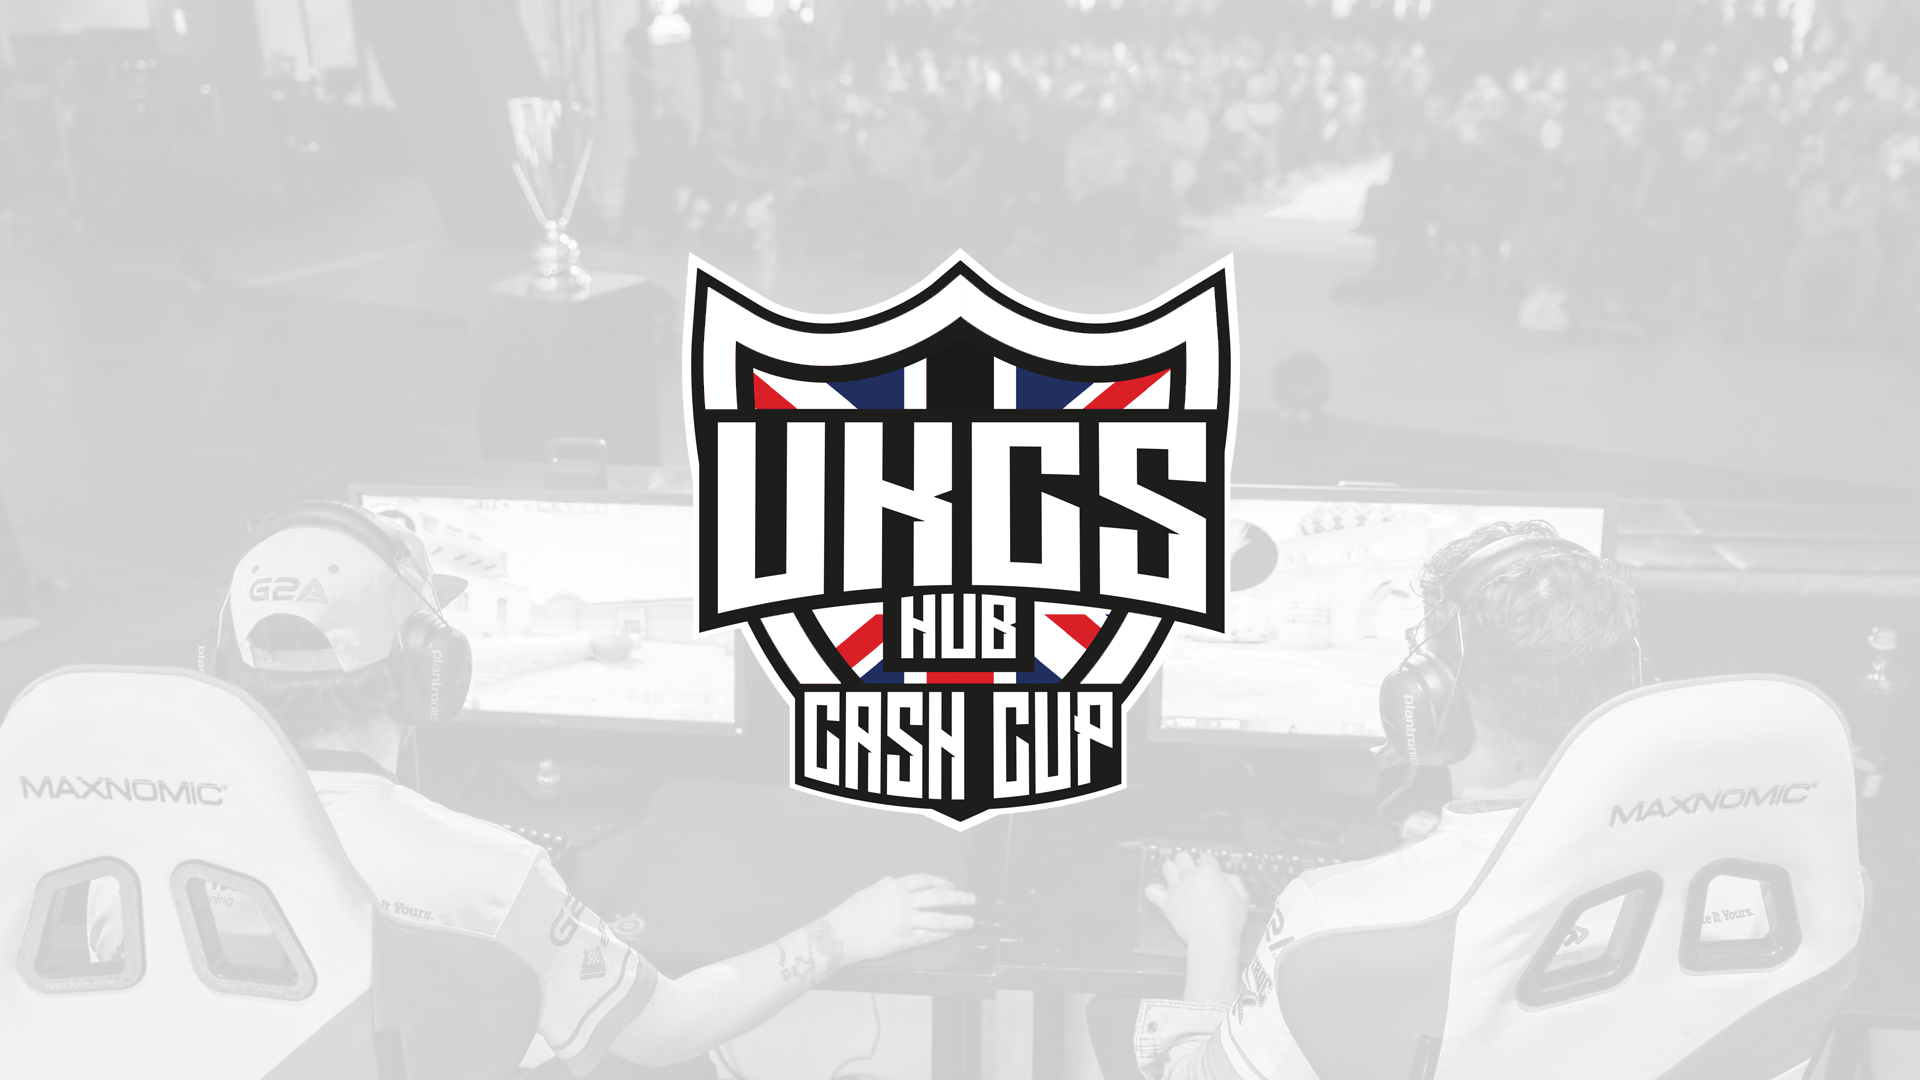 Viperio to compete in UKCS Hub Spring Cash Cup